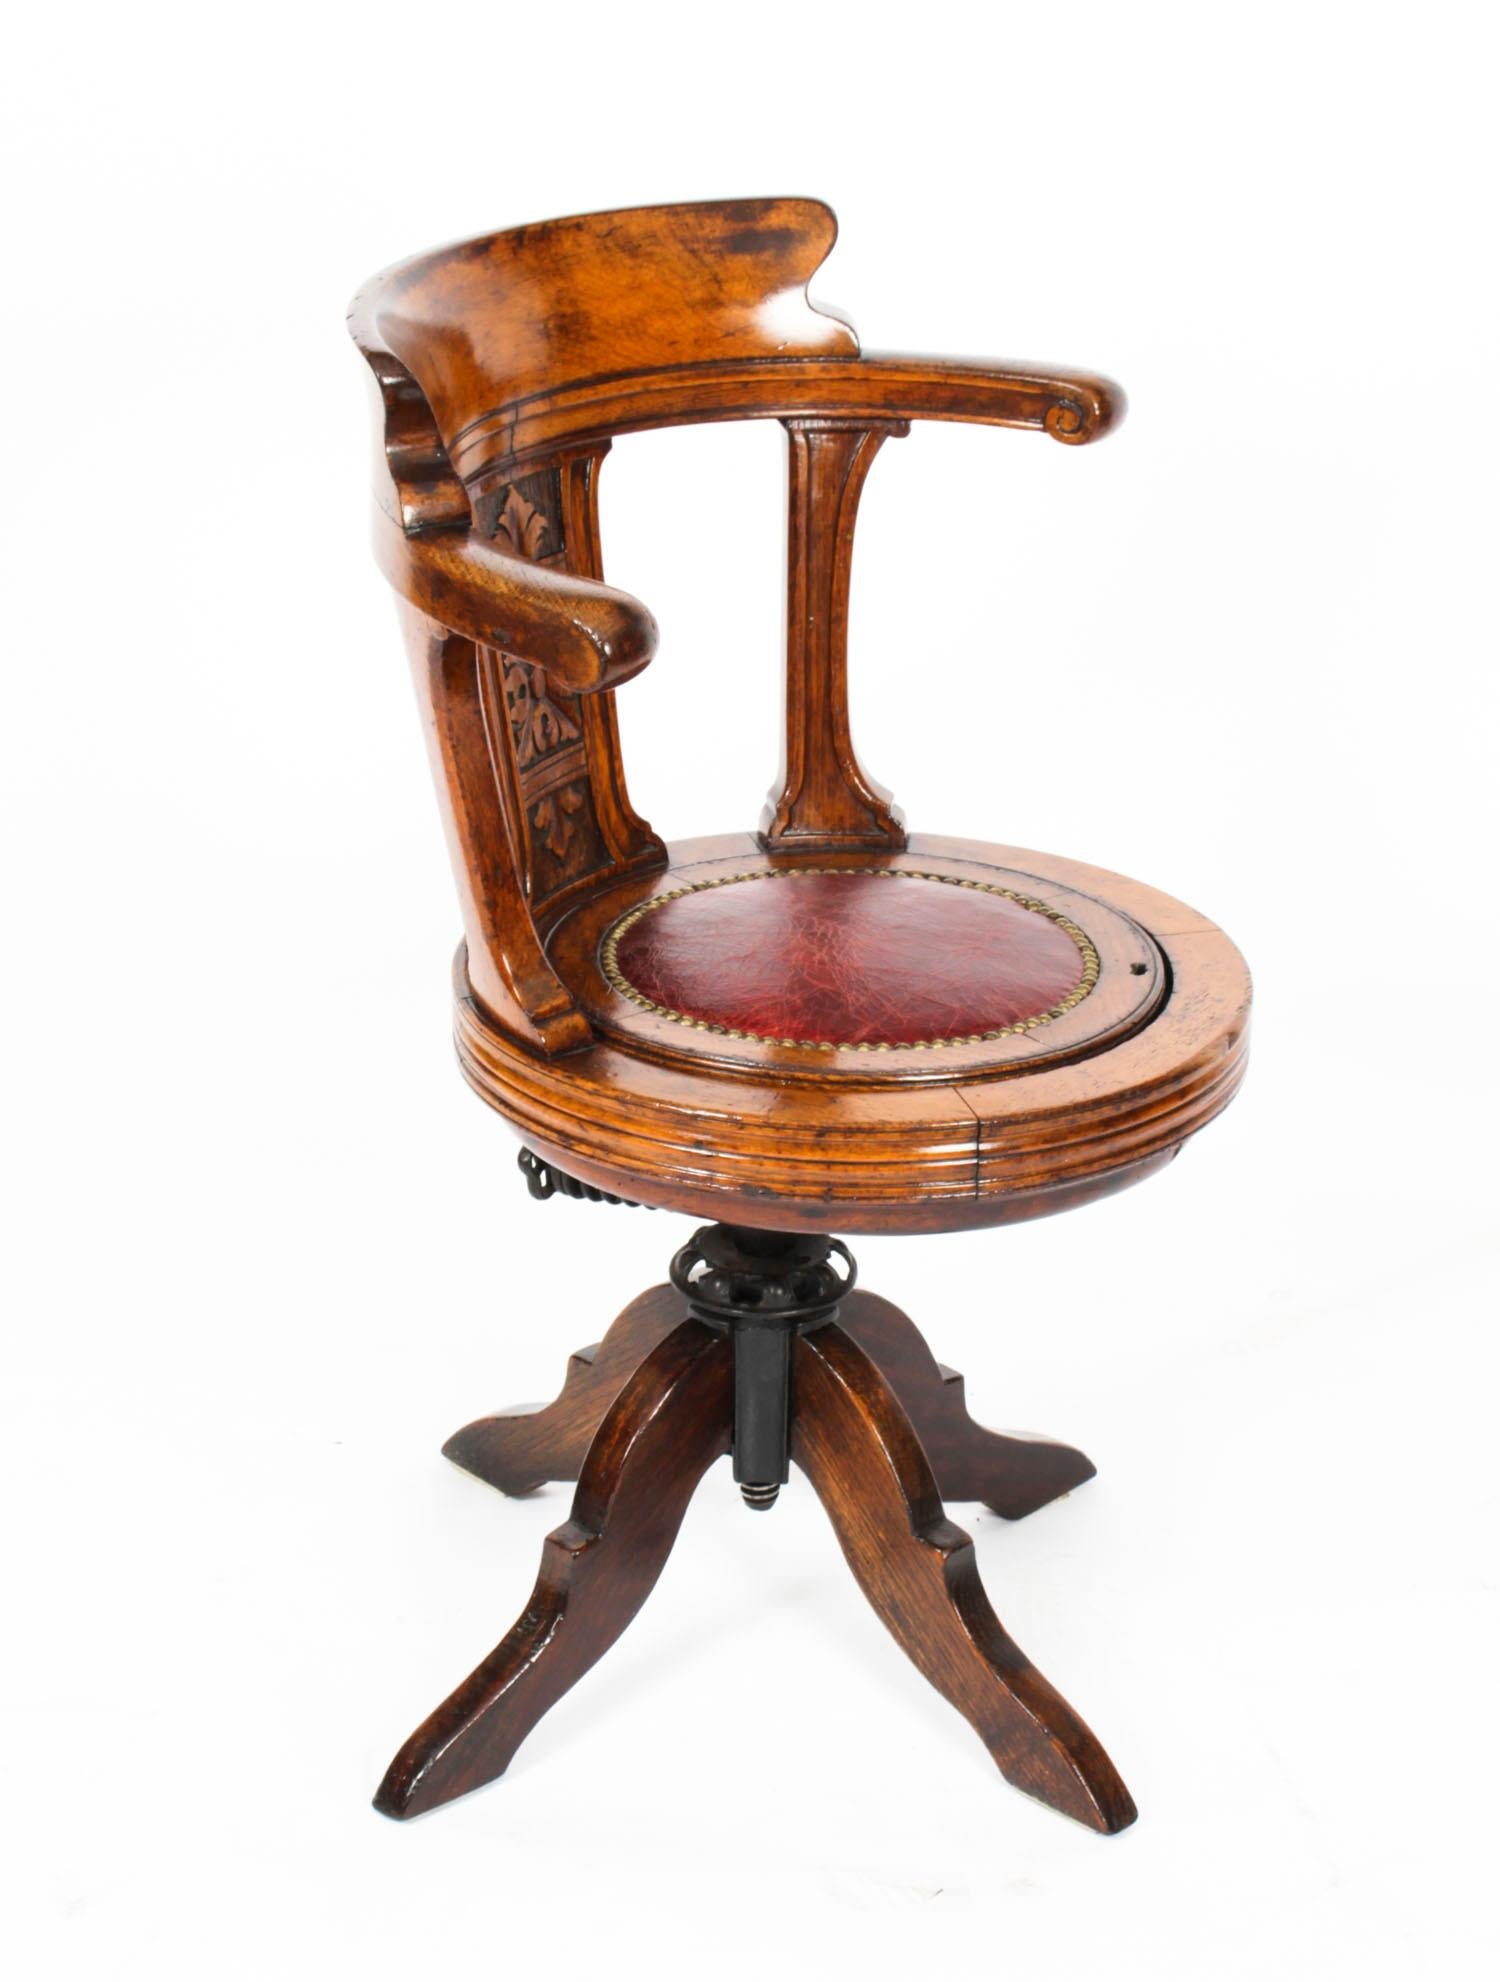 An absolutely stunning antique 19th century Victorian oak swivel ships, captains cockpit desk chair, Circa 1880 in date.

The chair having a curved backrest with a central carved back panel with scrolled armrests. The circular seat having an inset